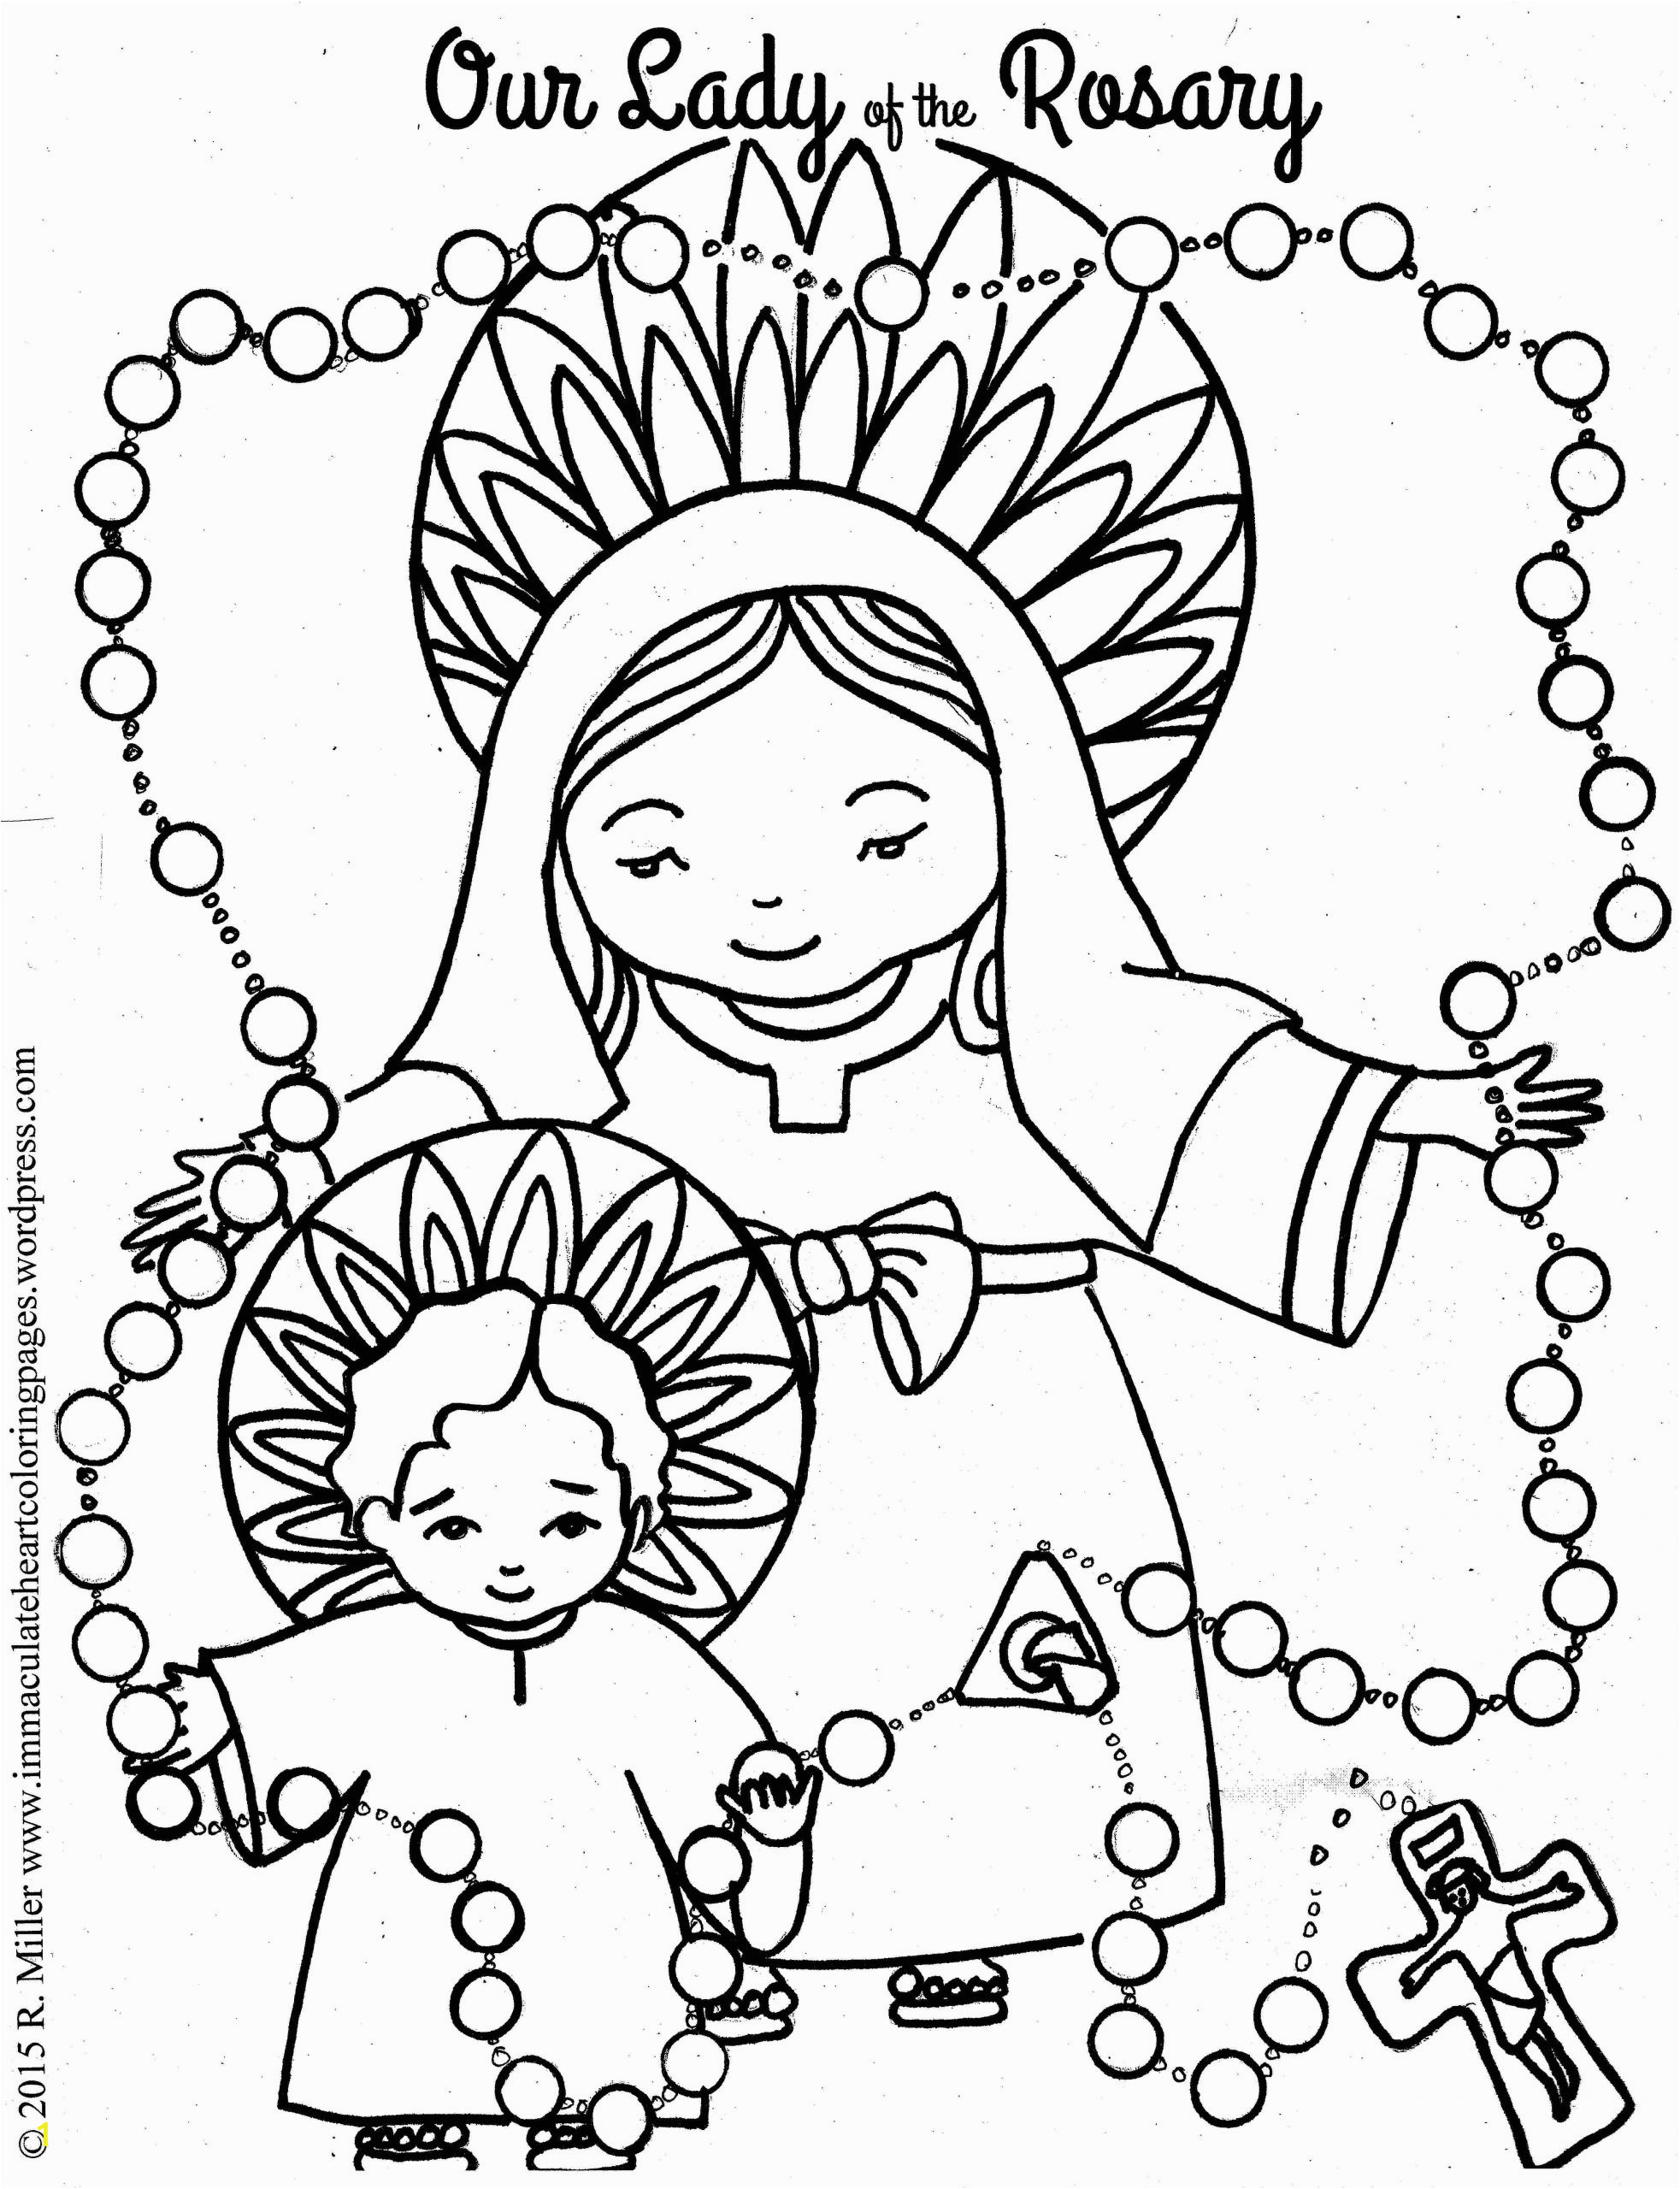 Queen Esther Coloring Pages Printable Niku Coloring Luxury Coloring Pages Unicorn Face